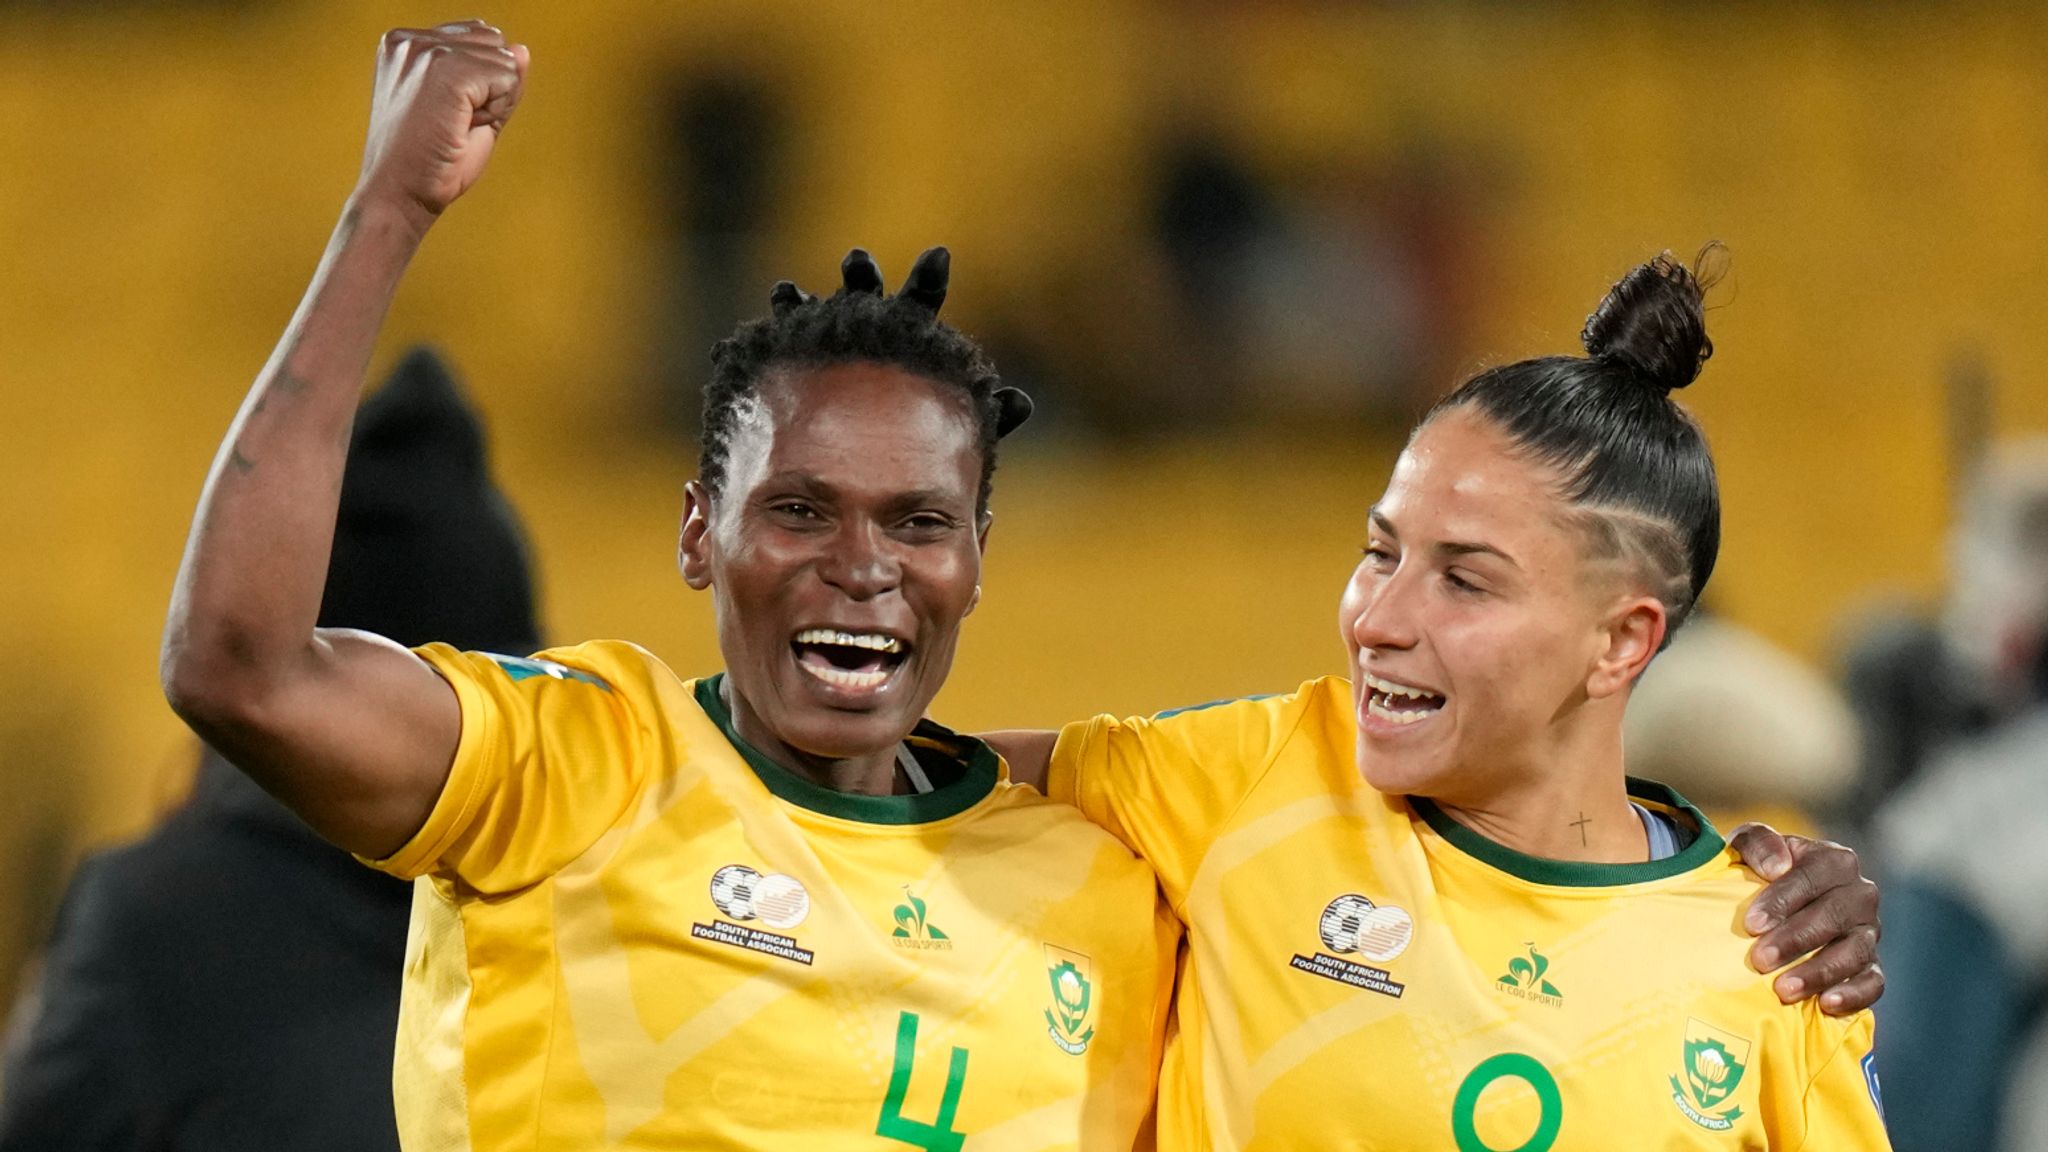 South Africa 3-2 Italy: Thembi Kgatlana's late goal sees South